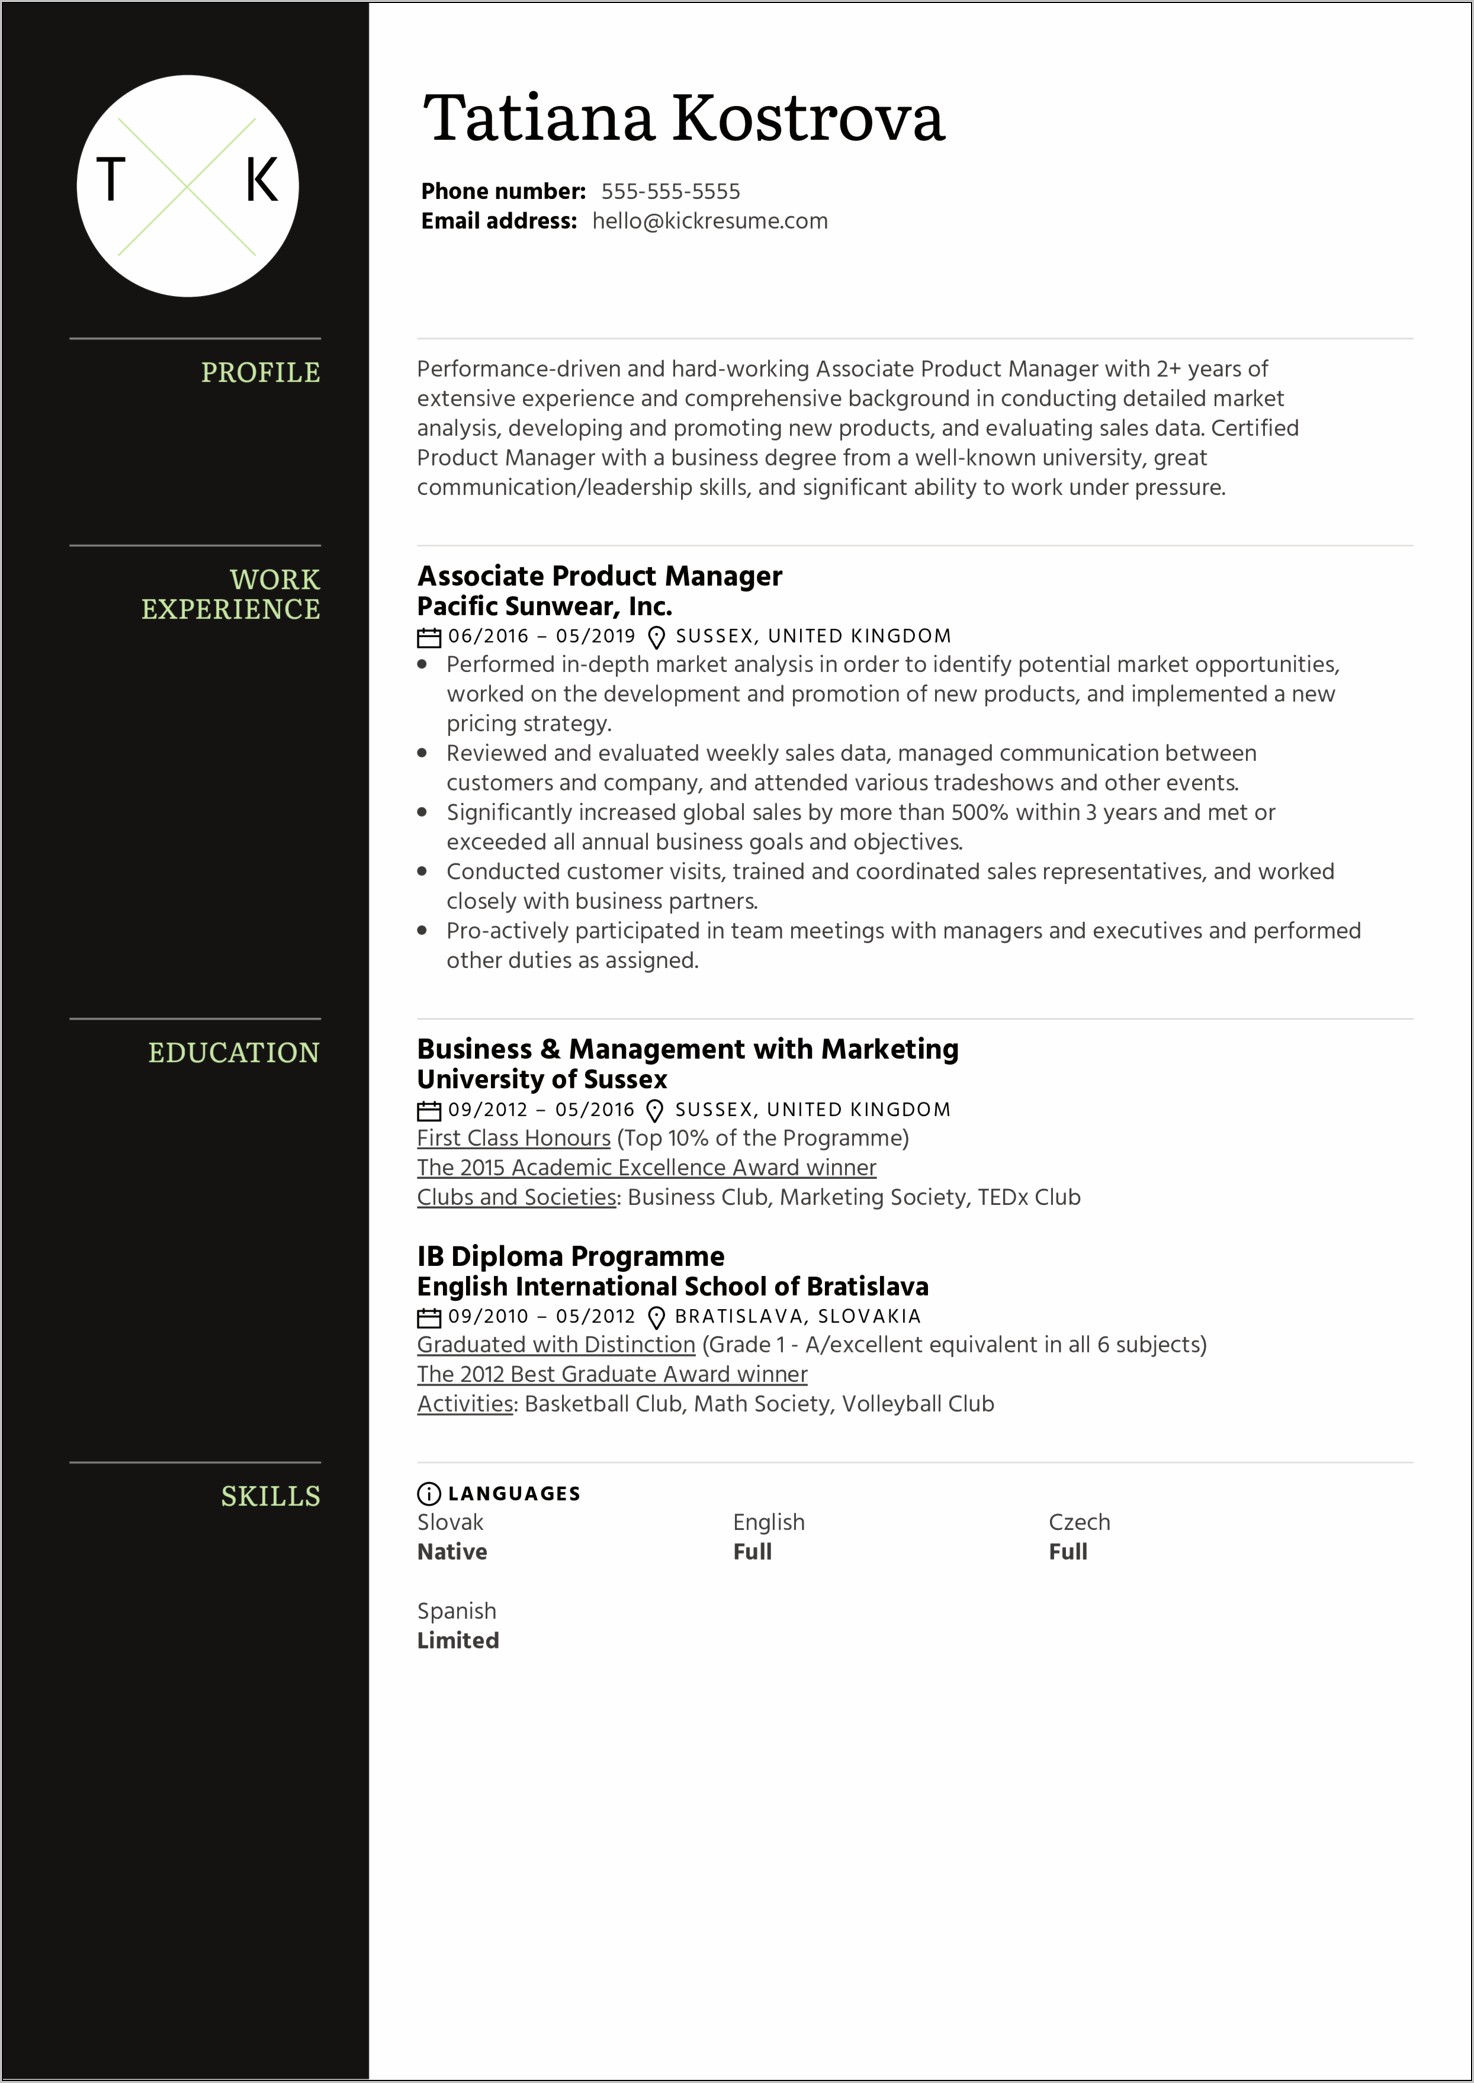 Sales Manager Resume Examples 2019